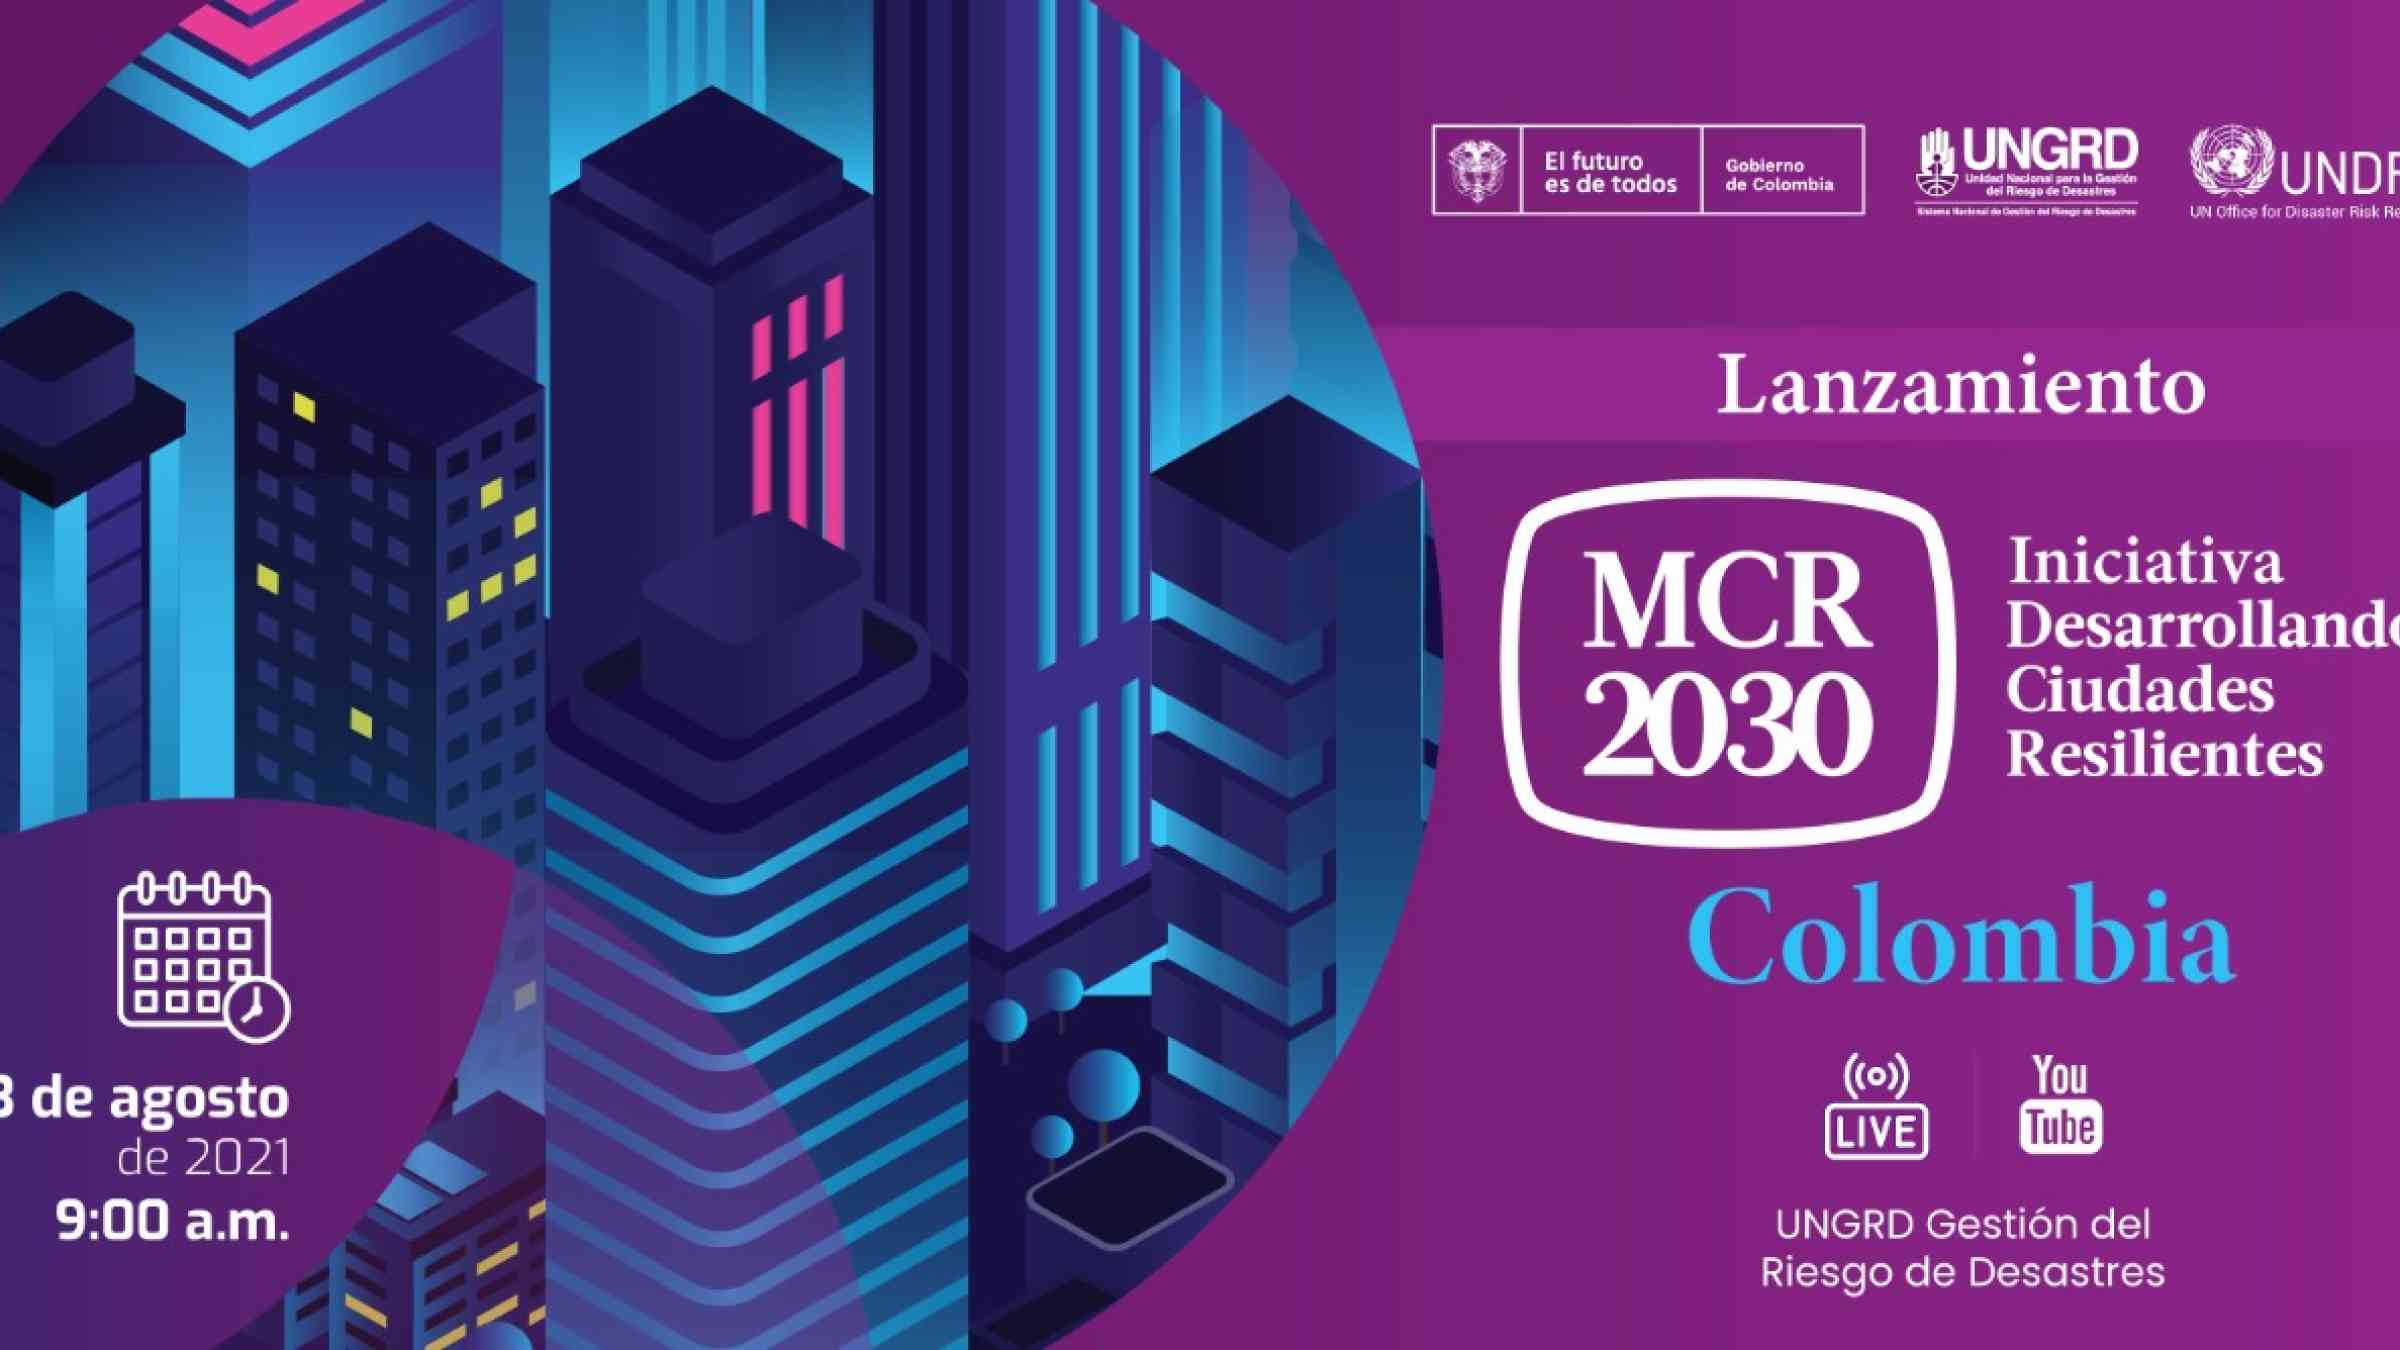 UNGRD Colombia launches MCR2030